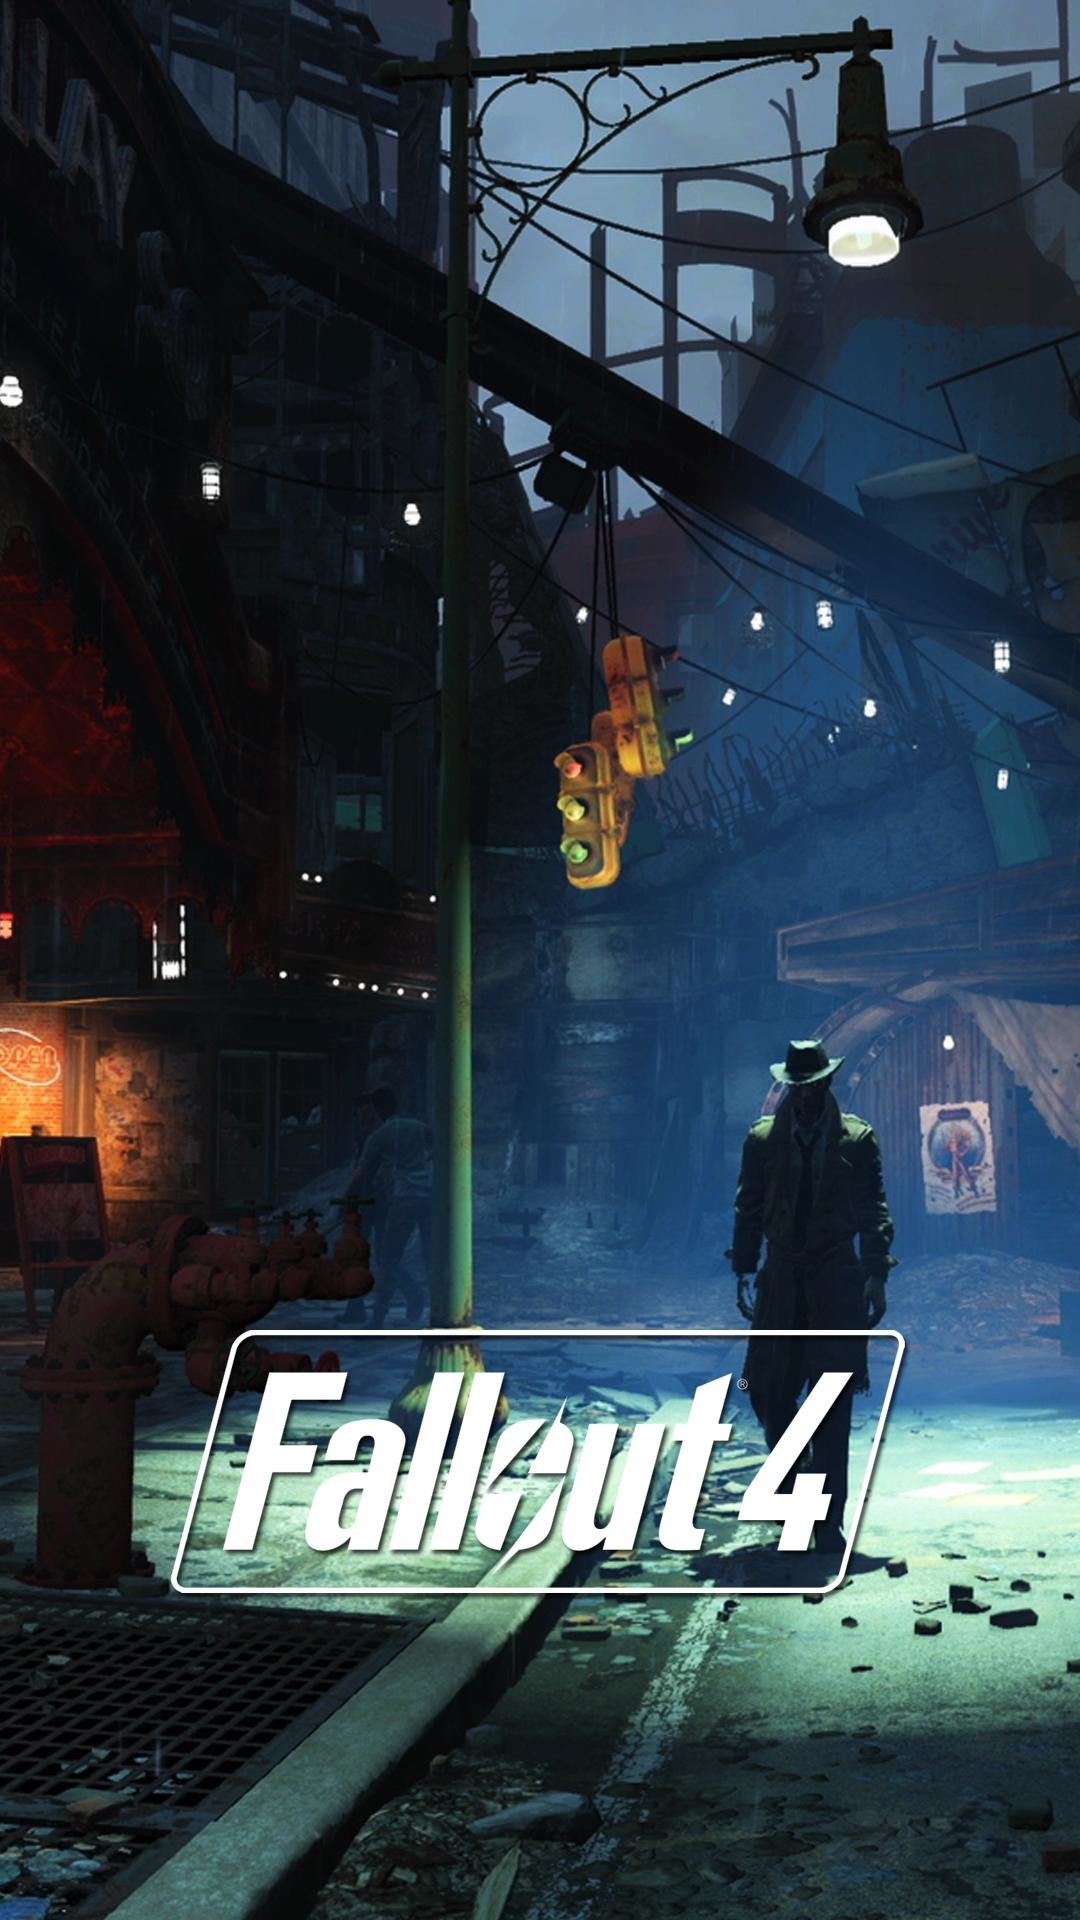 Fallout 4 nieuws: Prachtige iPhone- en Android wallpapers voor Fallout .